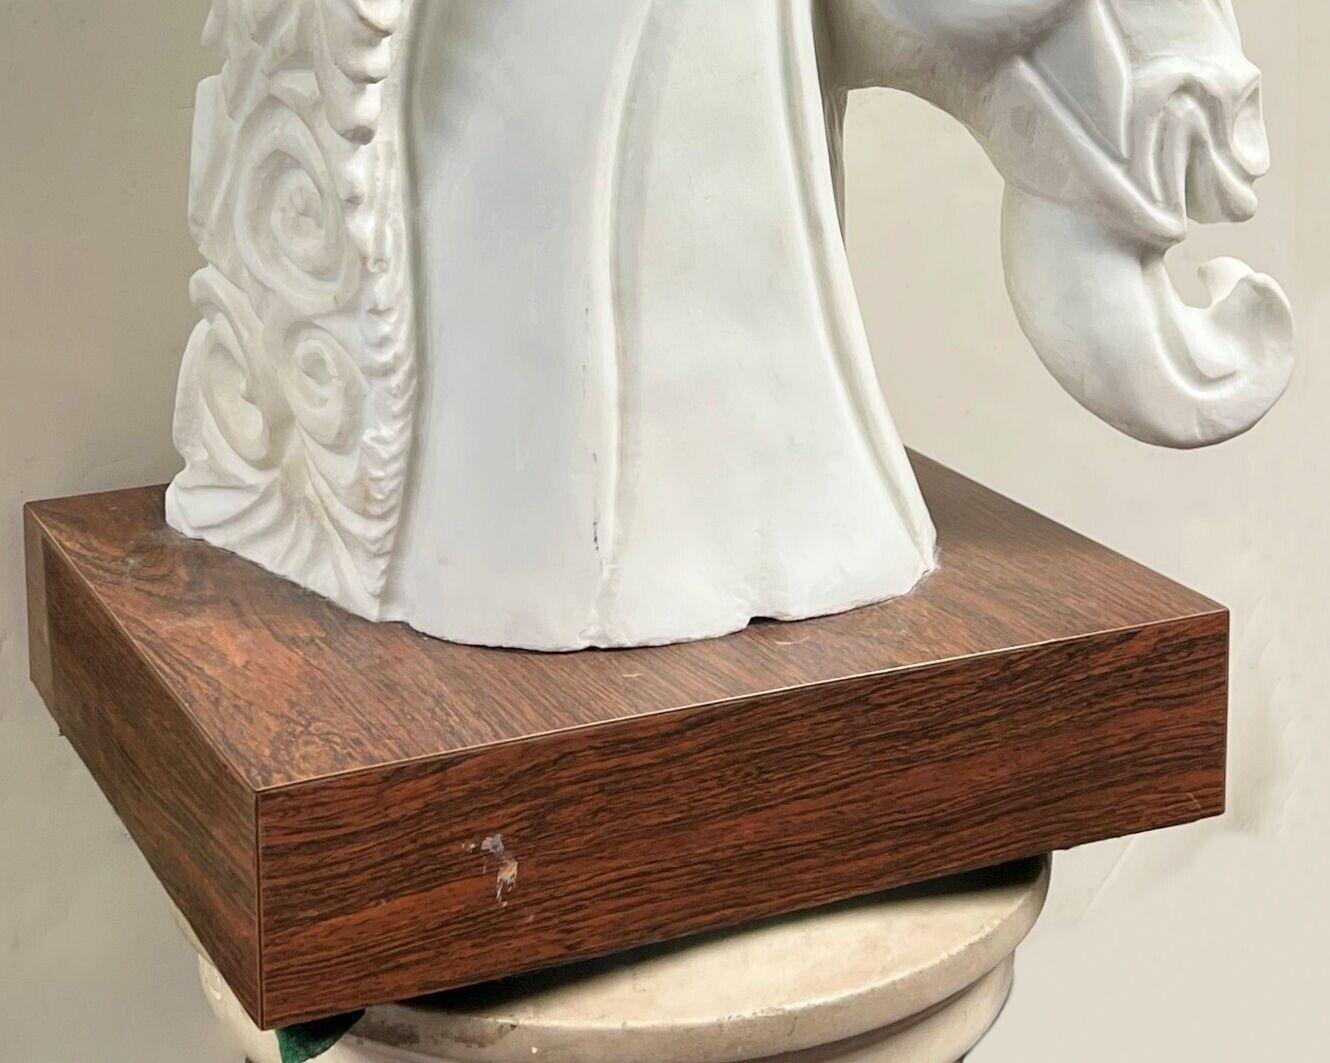 Stylized marble sculpture of a horse by the Italian sculptor, Amedeo Gennarelli (1881-1943), mounted on a wooden plinth with veneer.  